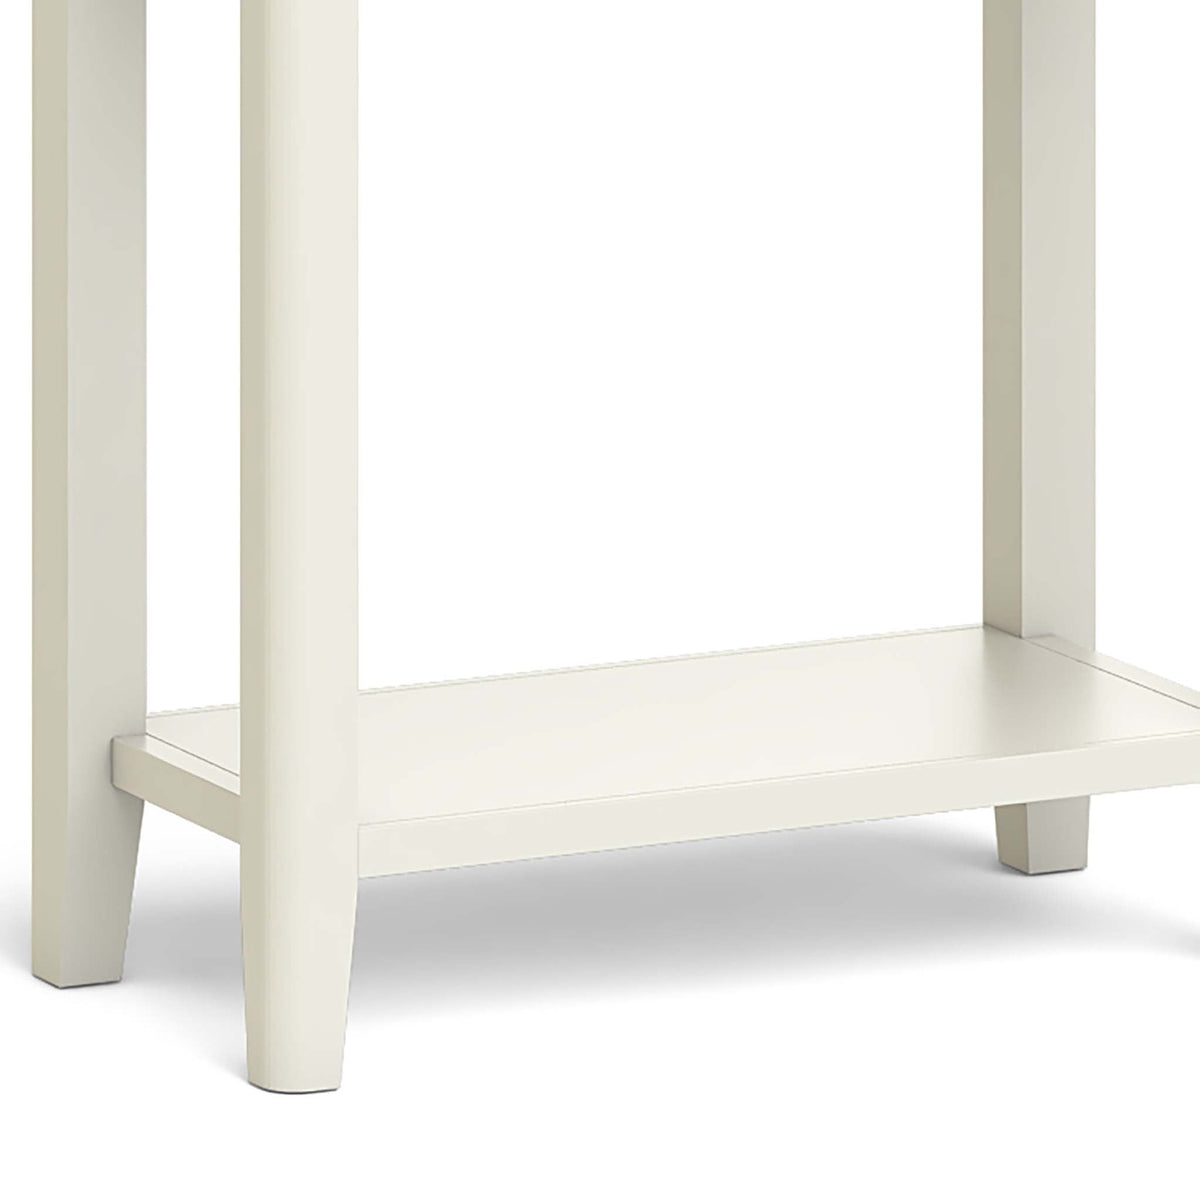 Windsor Cream Telephone Side Table - Close Up of Lower Shelf and legs